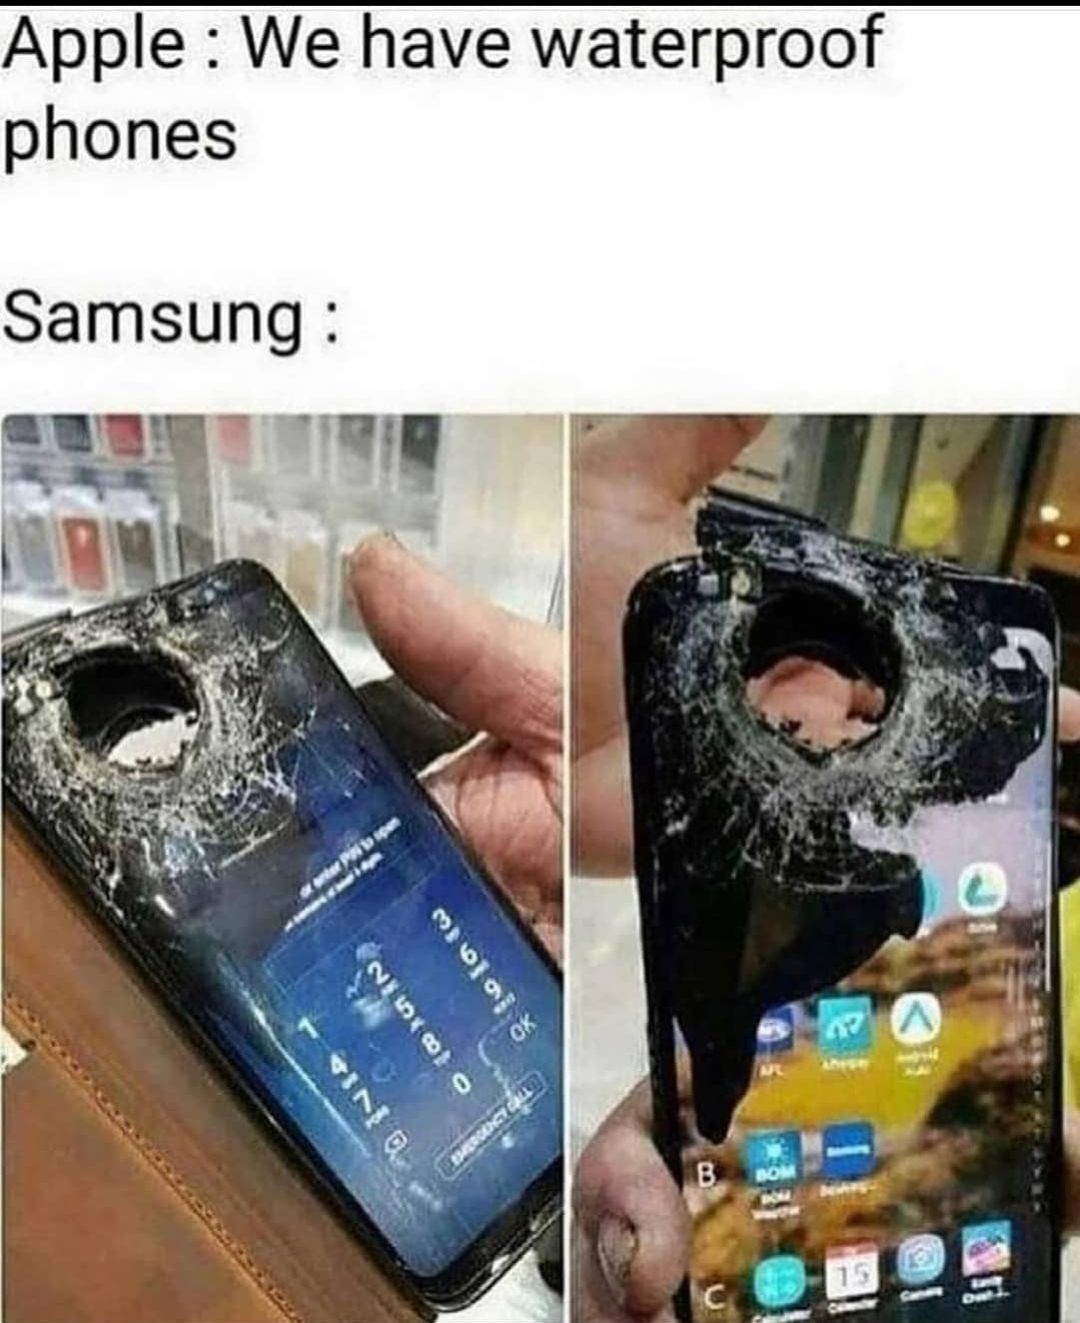 Now samsung can beat apple